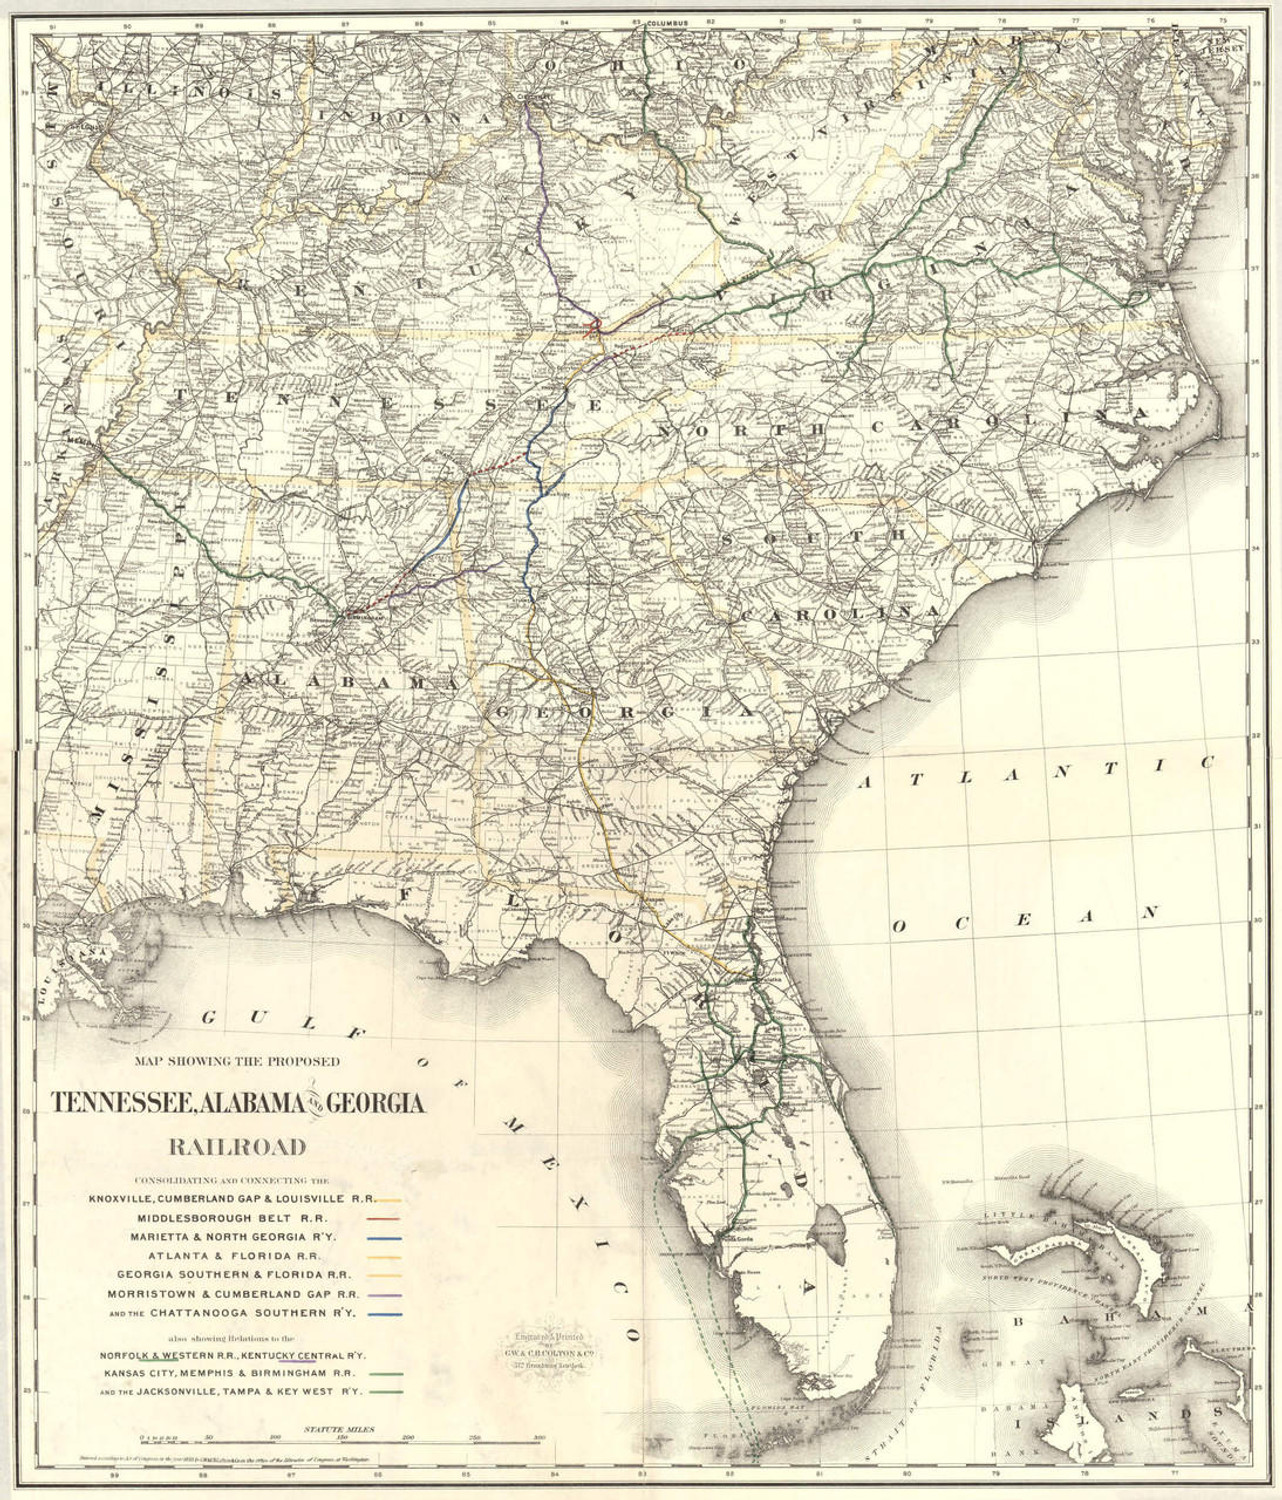 Historic Railroad Map of the Southern United States - 1893, image 1, World Maps Online